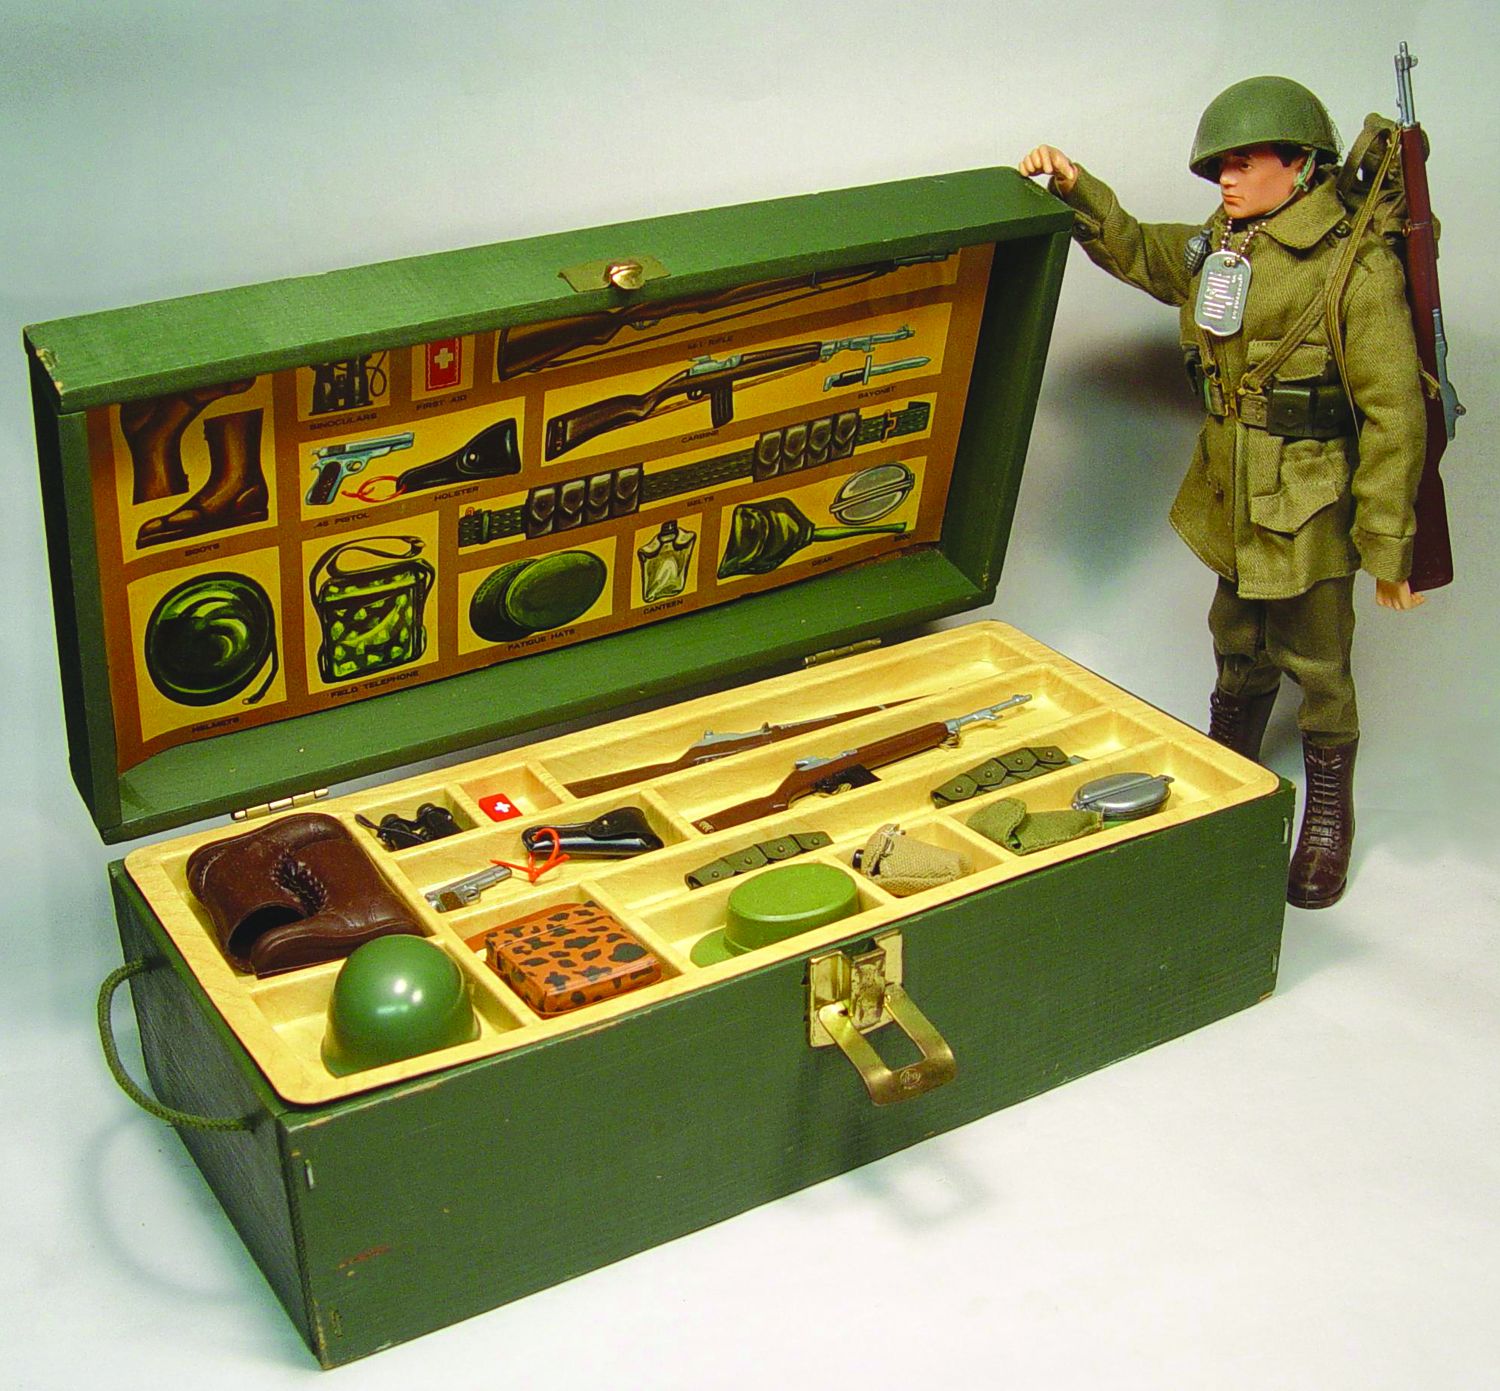 The original footlocker containing many of GI Joe’s early accessories is prized by collectors.